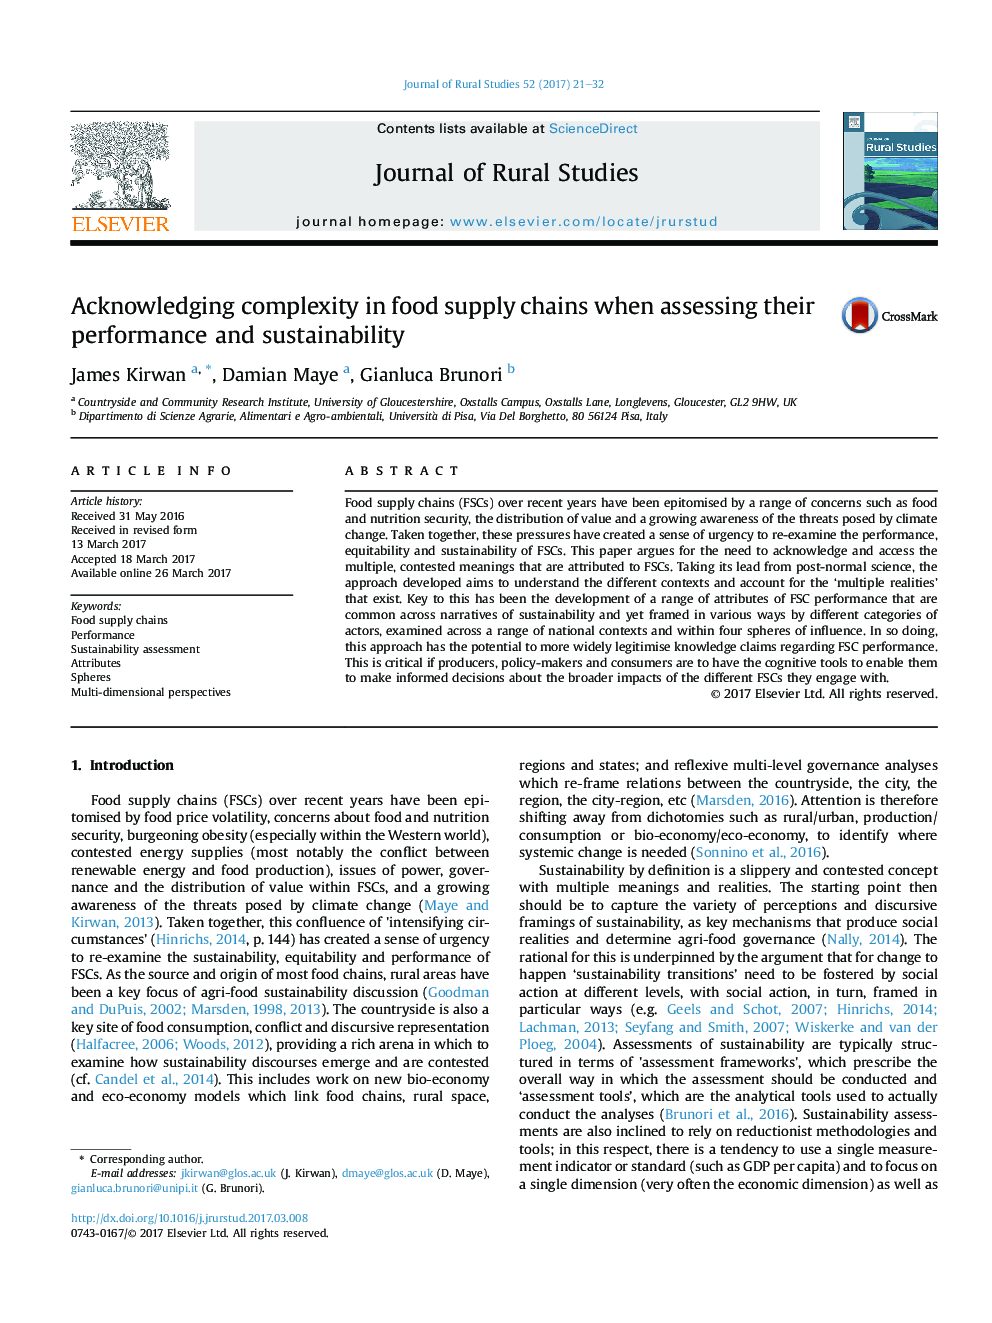 Acknowledging complexity in food supply chains when assessing their performance and sustainability